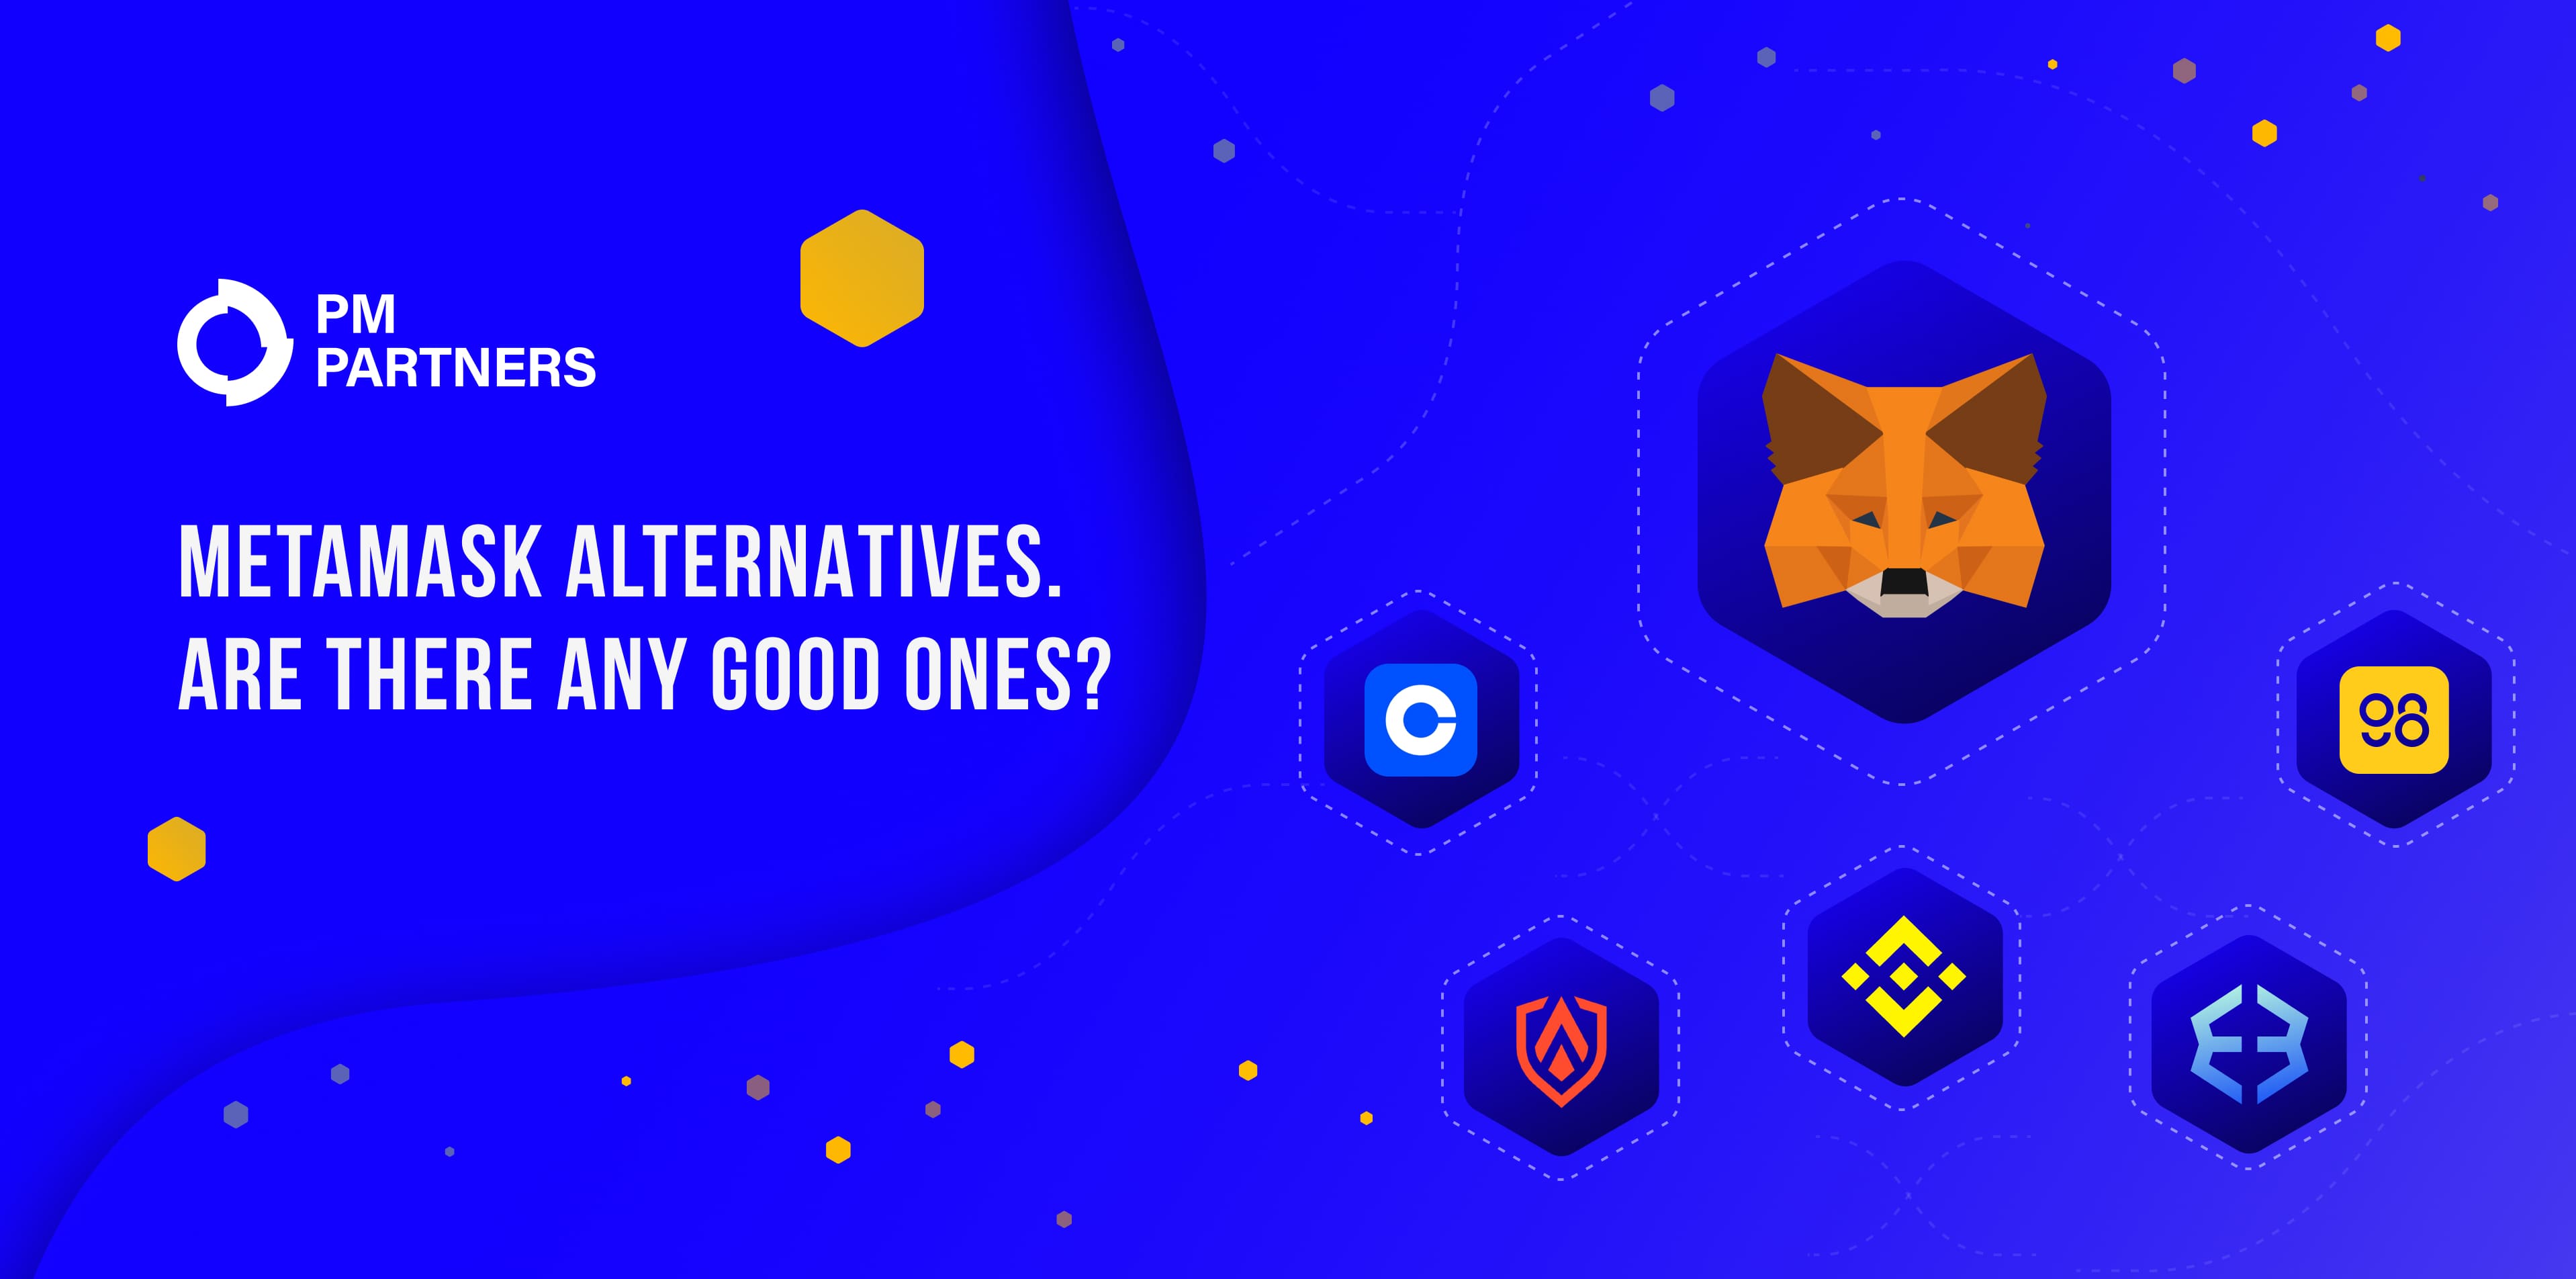 Metamask Alternatives. Are There Any Good Ones?